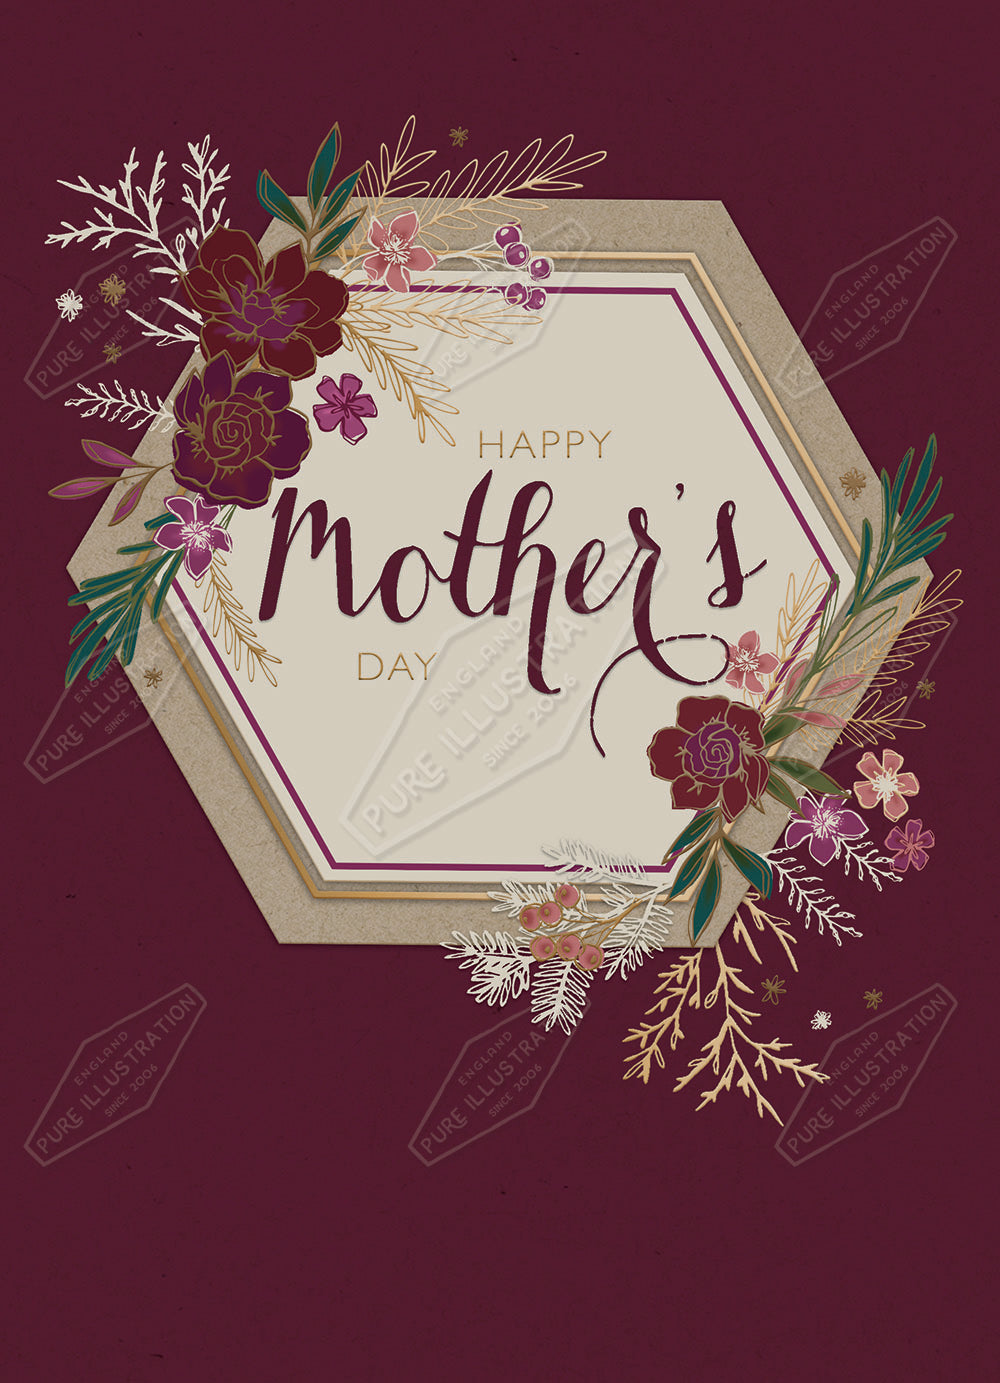 00032237KSP- Kerry Spurling is represented by Pure Art Licensing Agency - Mother's Day Greeting Card Design